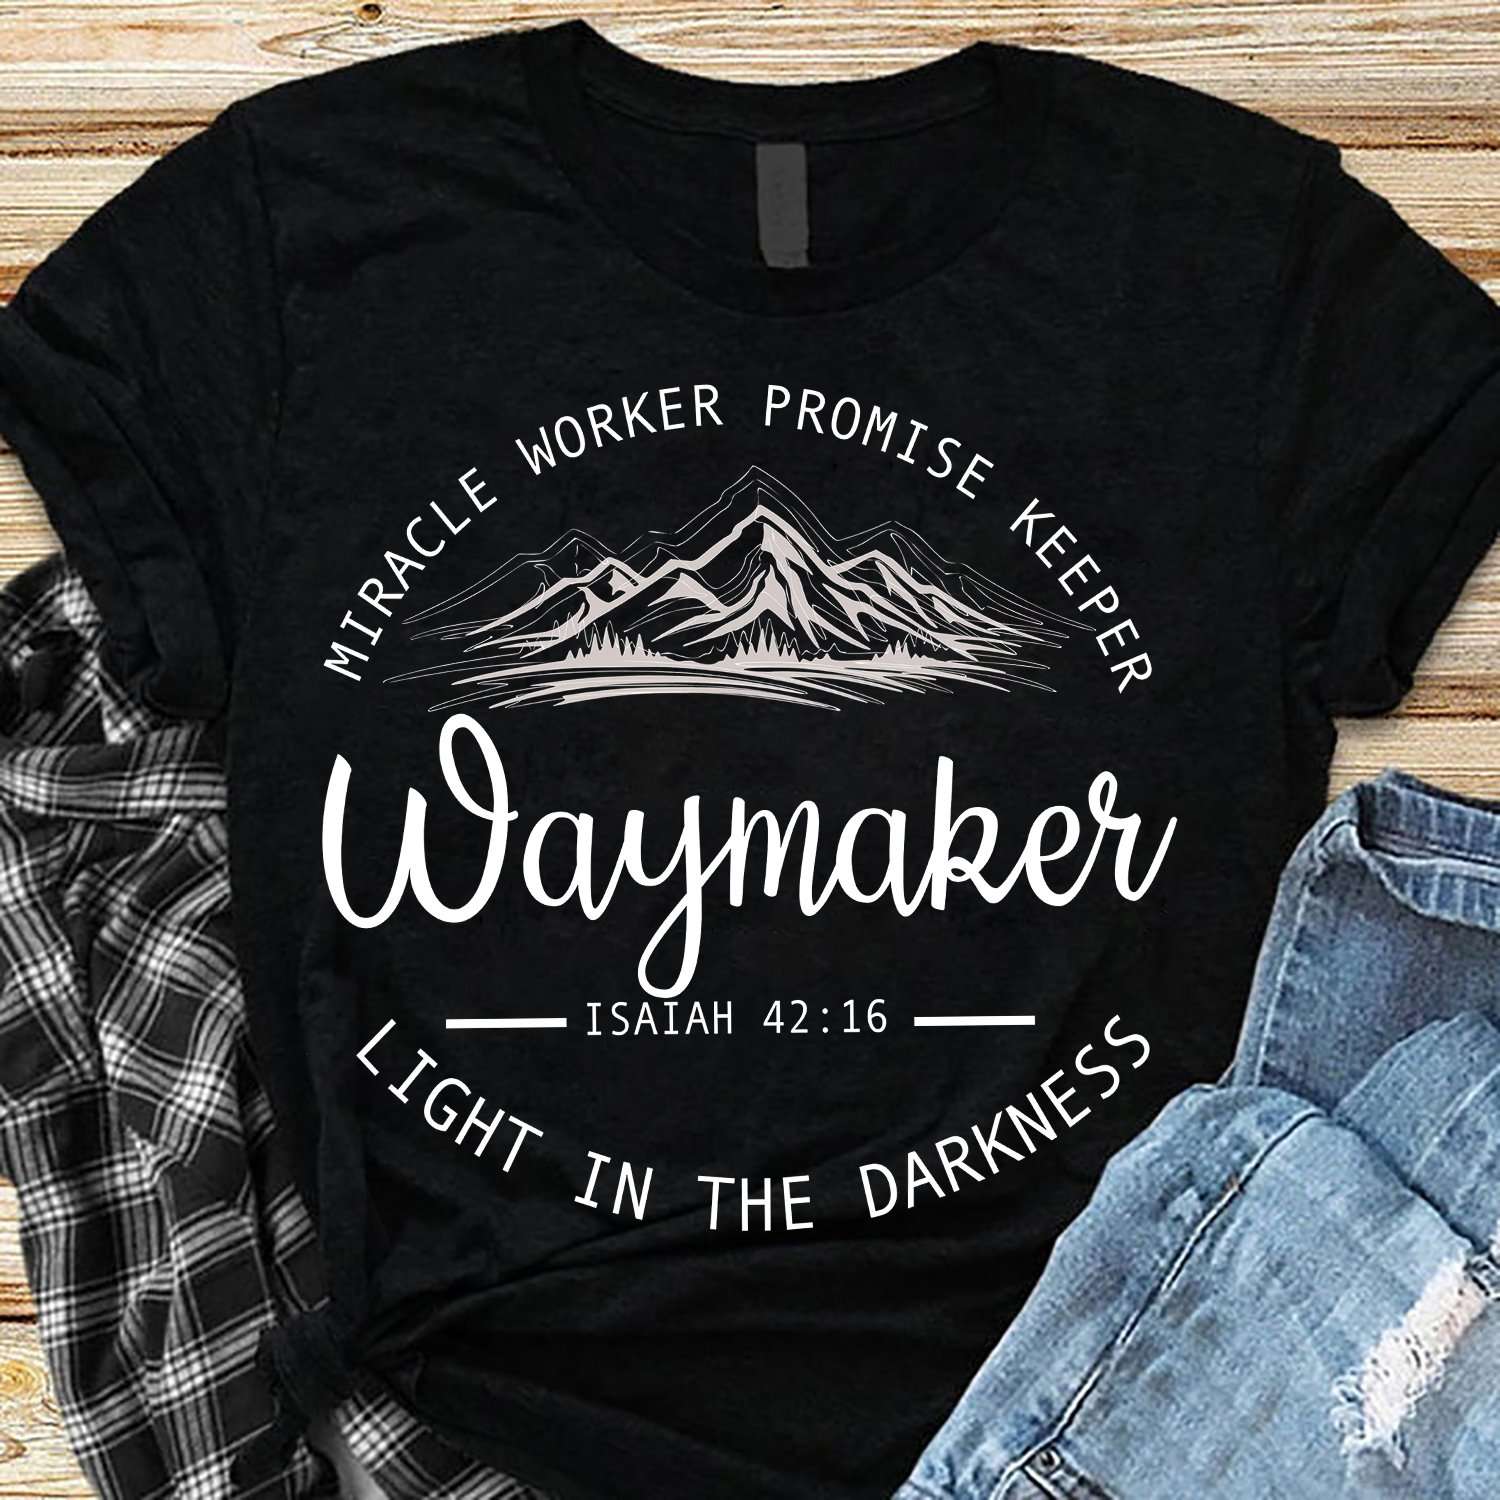 Miracle worker, promise keeper, light in the darkness - Mountain waymaker